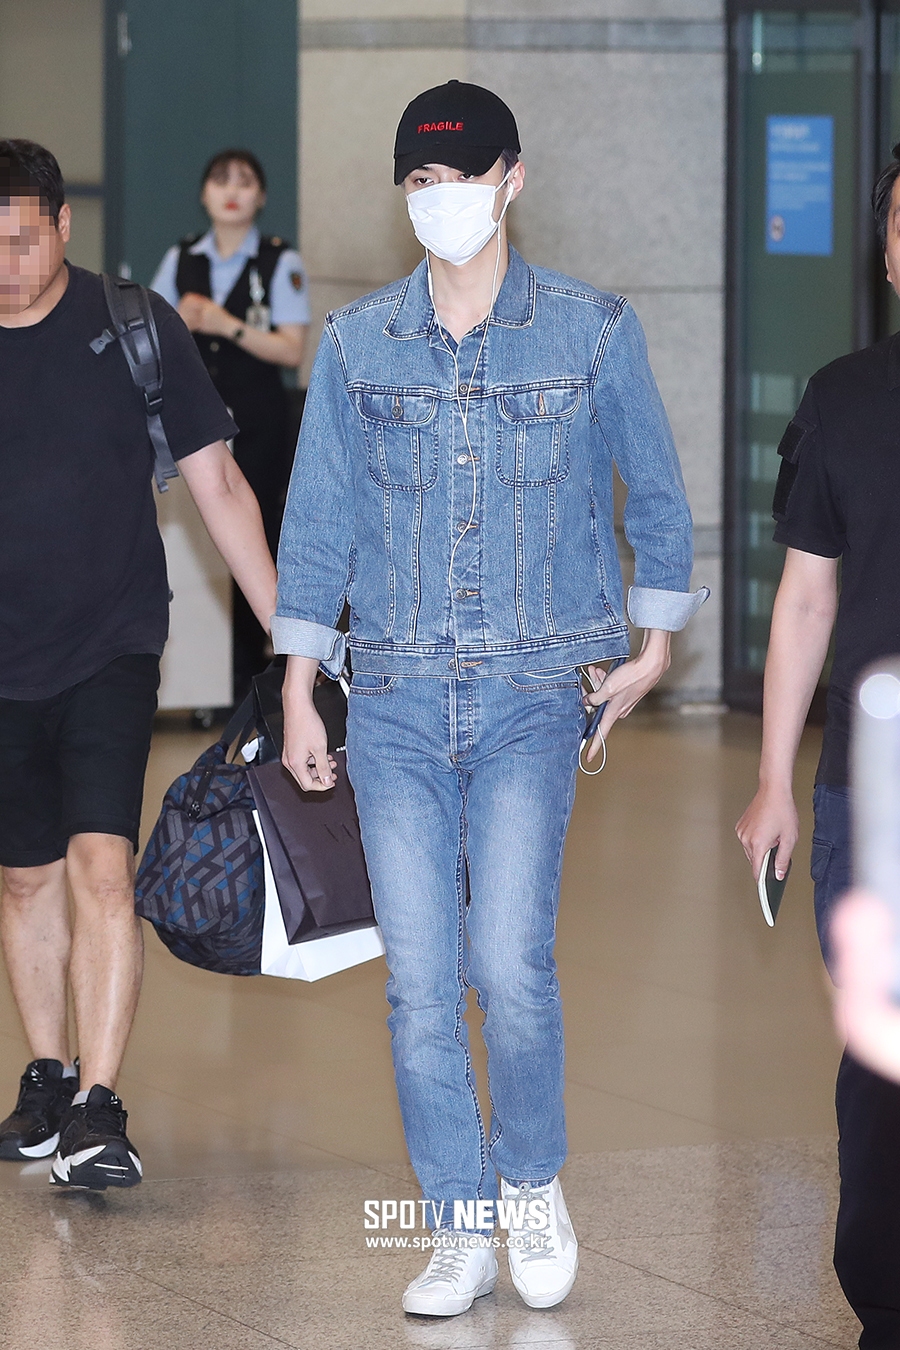 EXO Sehun is returning home via the Incheon International Airport on the morning of the 24th after finishing the Thailand fan meeting schedule.